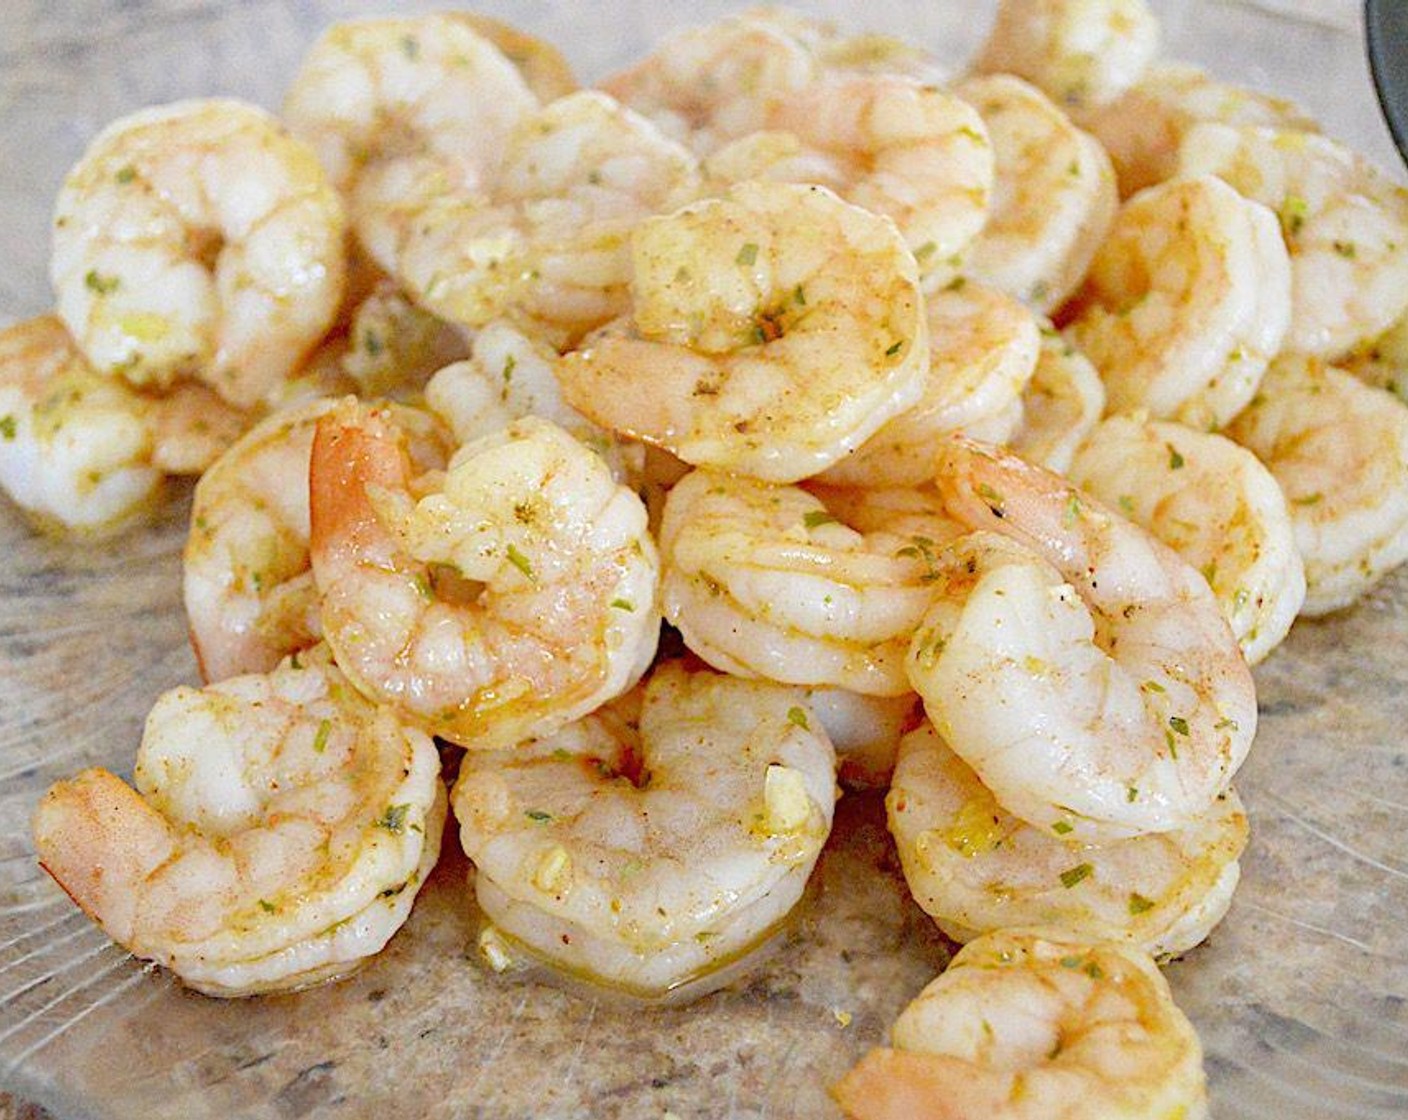 step 3 Add the Jumbo Shrimp (1.5 lb) and let them cook until pink and opaque for about 3 minutes. While they cook, also add in the Garlic (3 cloves), Shallot (1), zest of the Lemon (1/2), Old Bay® Seasoning (1/2 tsp), Dried Tarragon (1/2 tsp), Salt (1 pinch), and White Wine (1 Tbsp). Then use a slotted spoon to remove the shrimp to a plate and set aside.